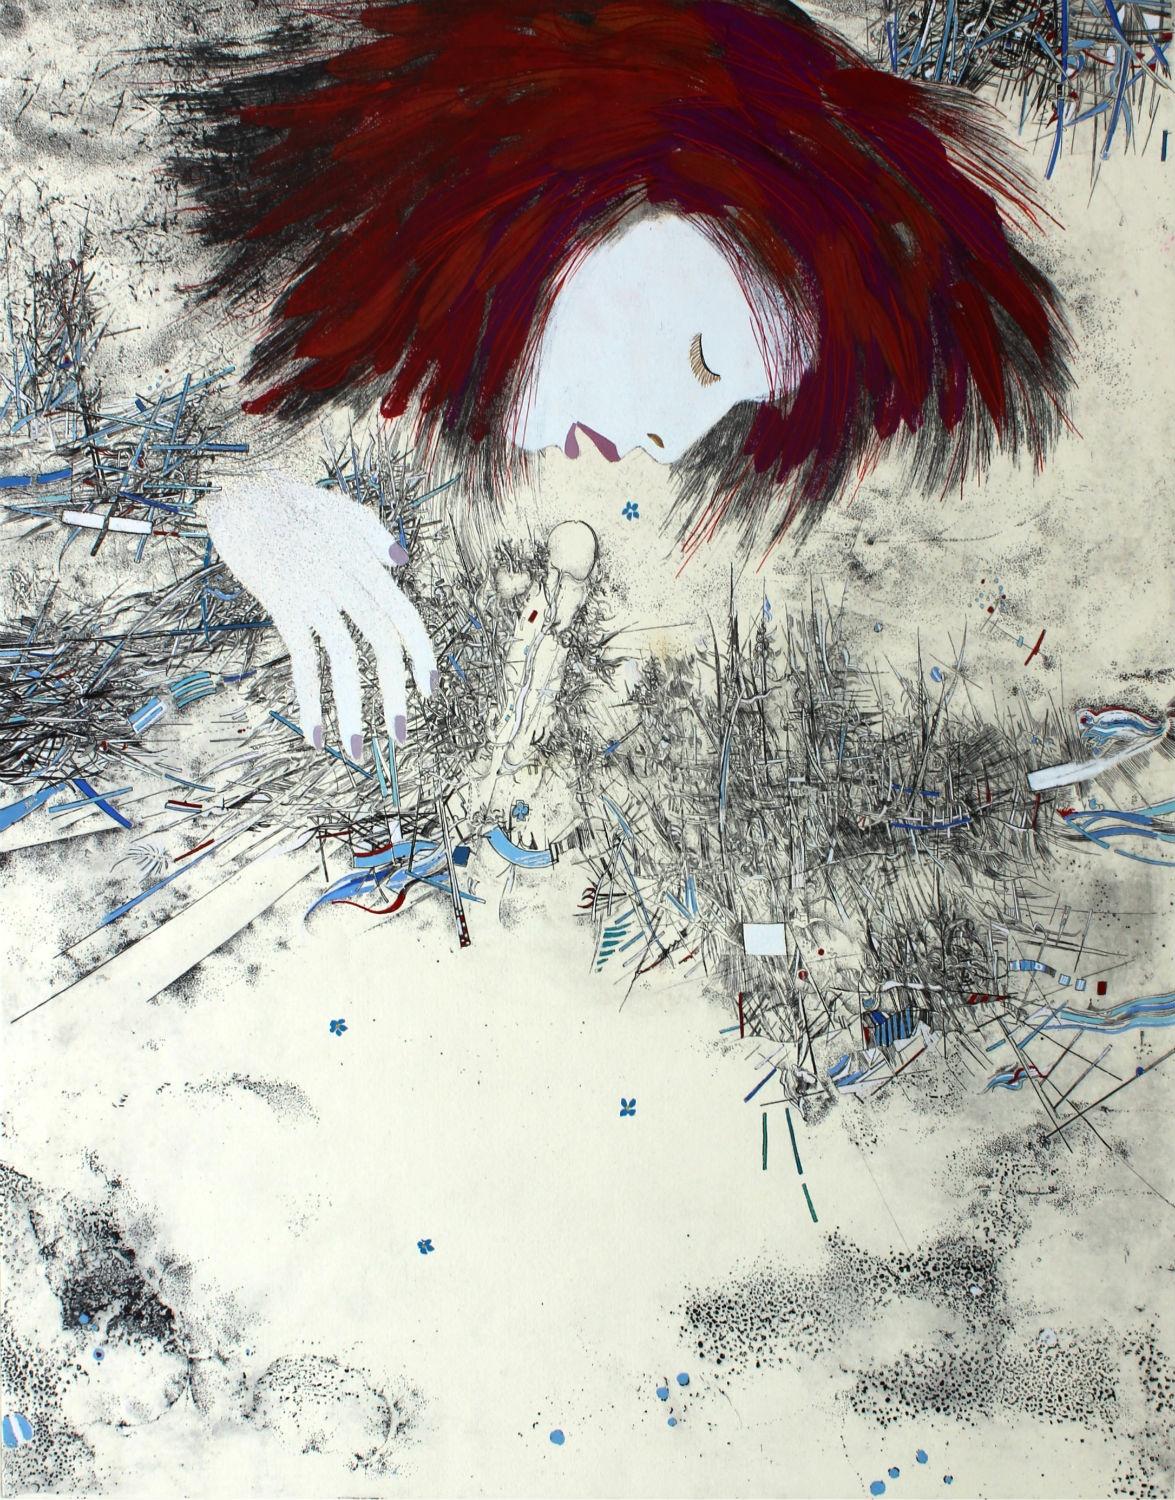 Forget me nots - XX century, Mixed media print, Figurative, Portrait, Abstract